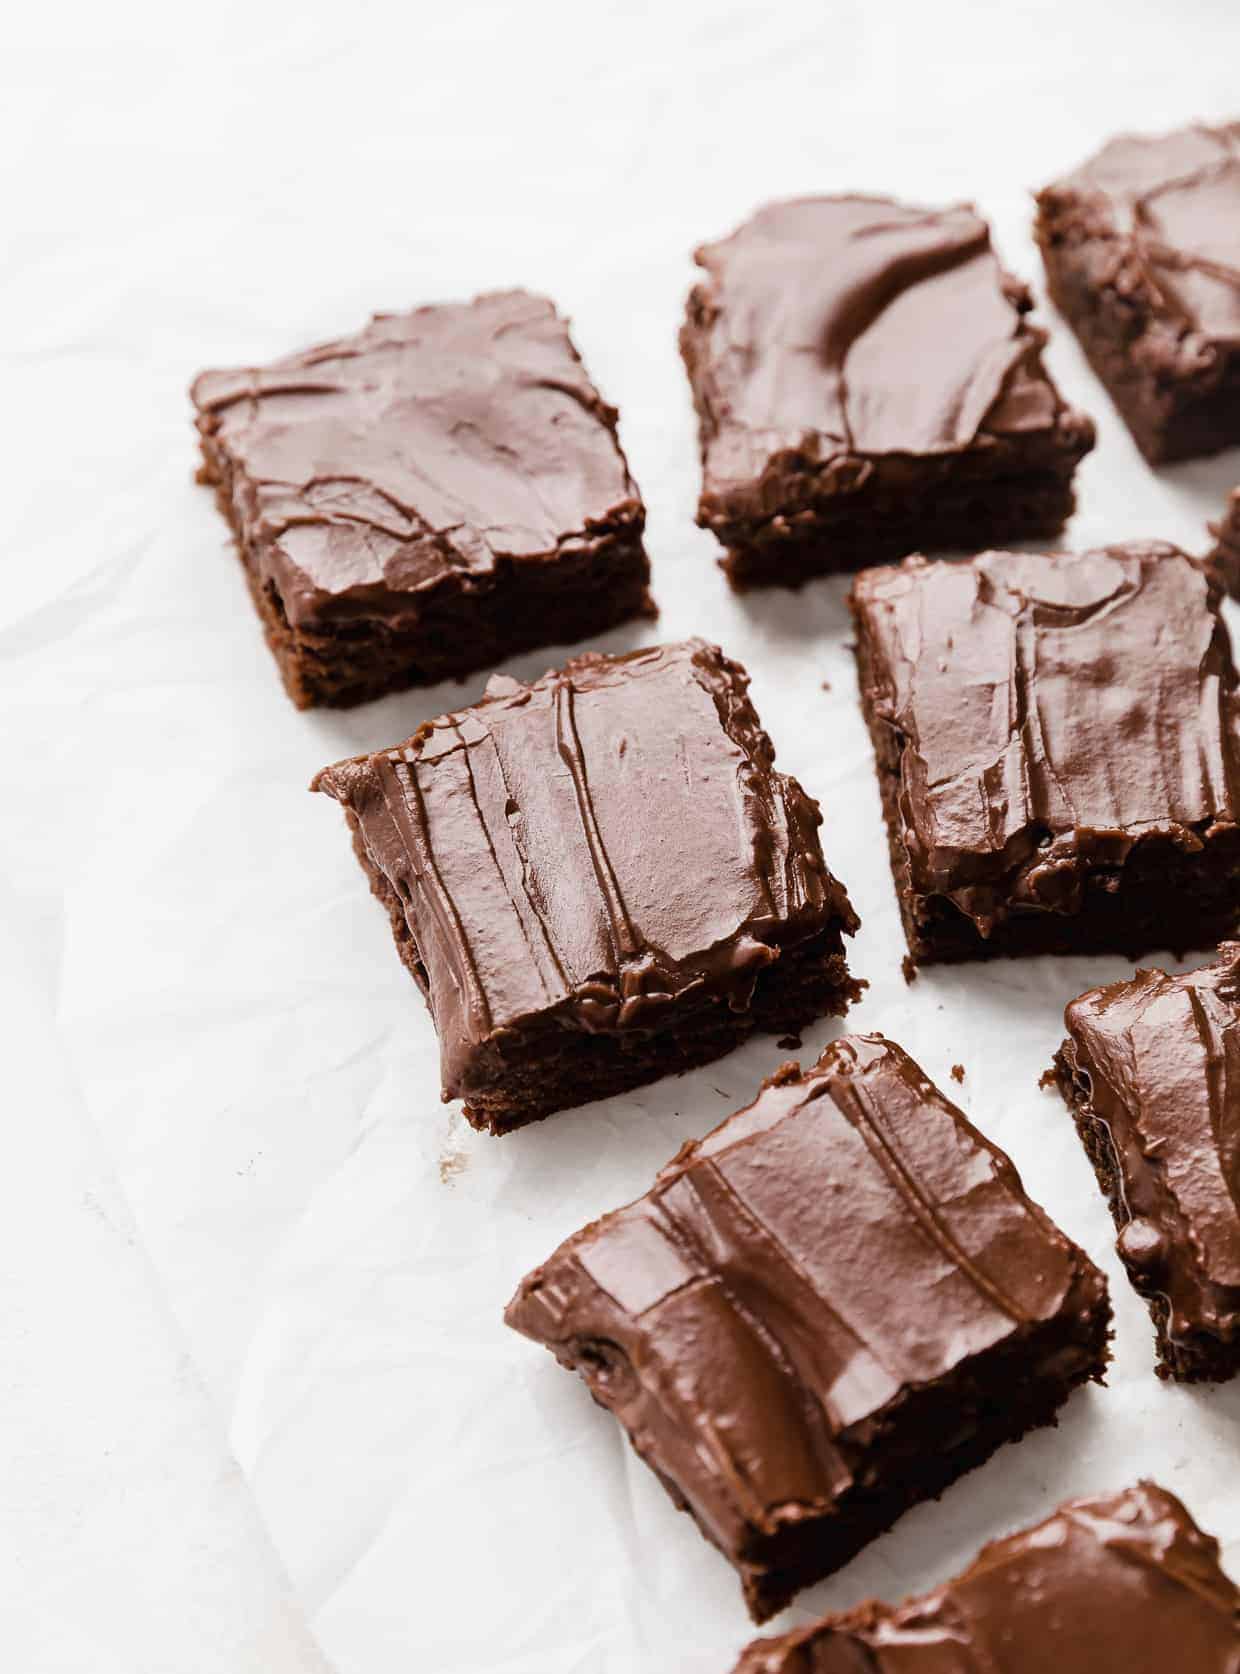 Chocolate frosted lunch lady brownies cut into squares on a white background.